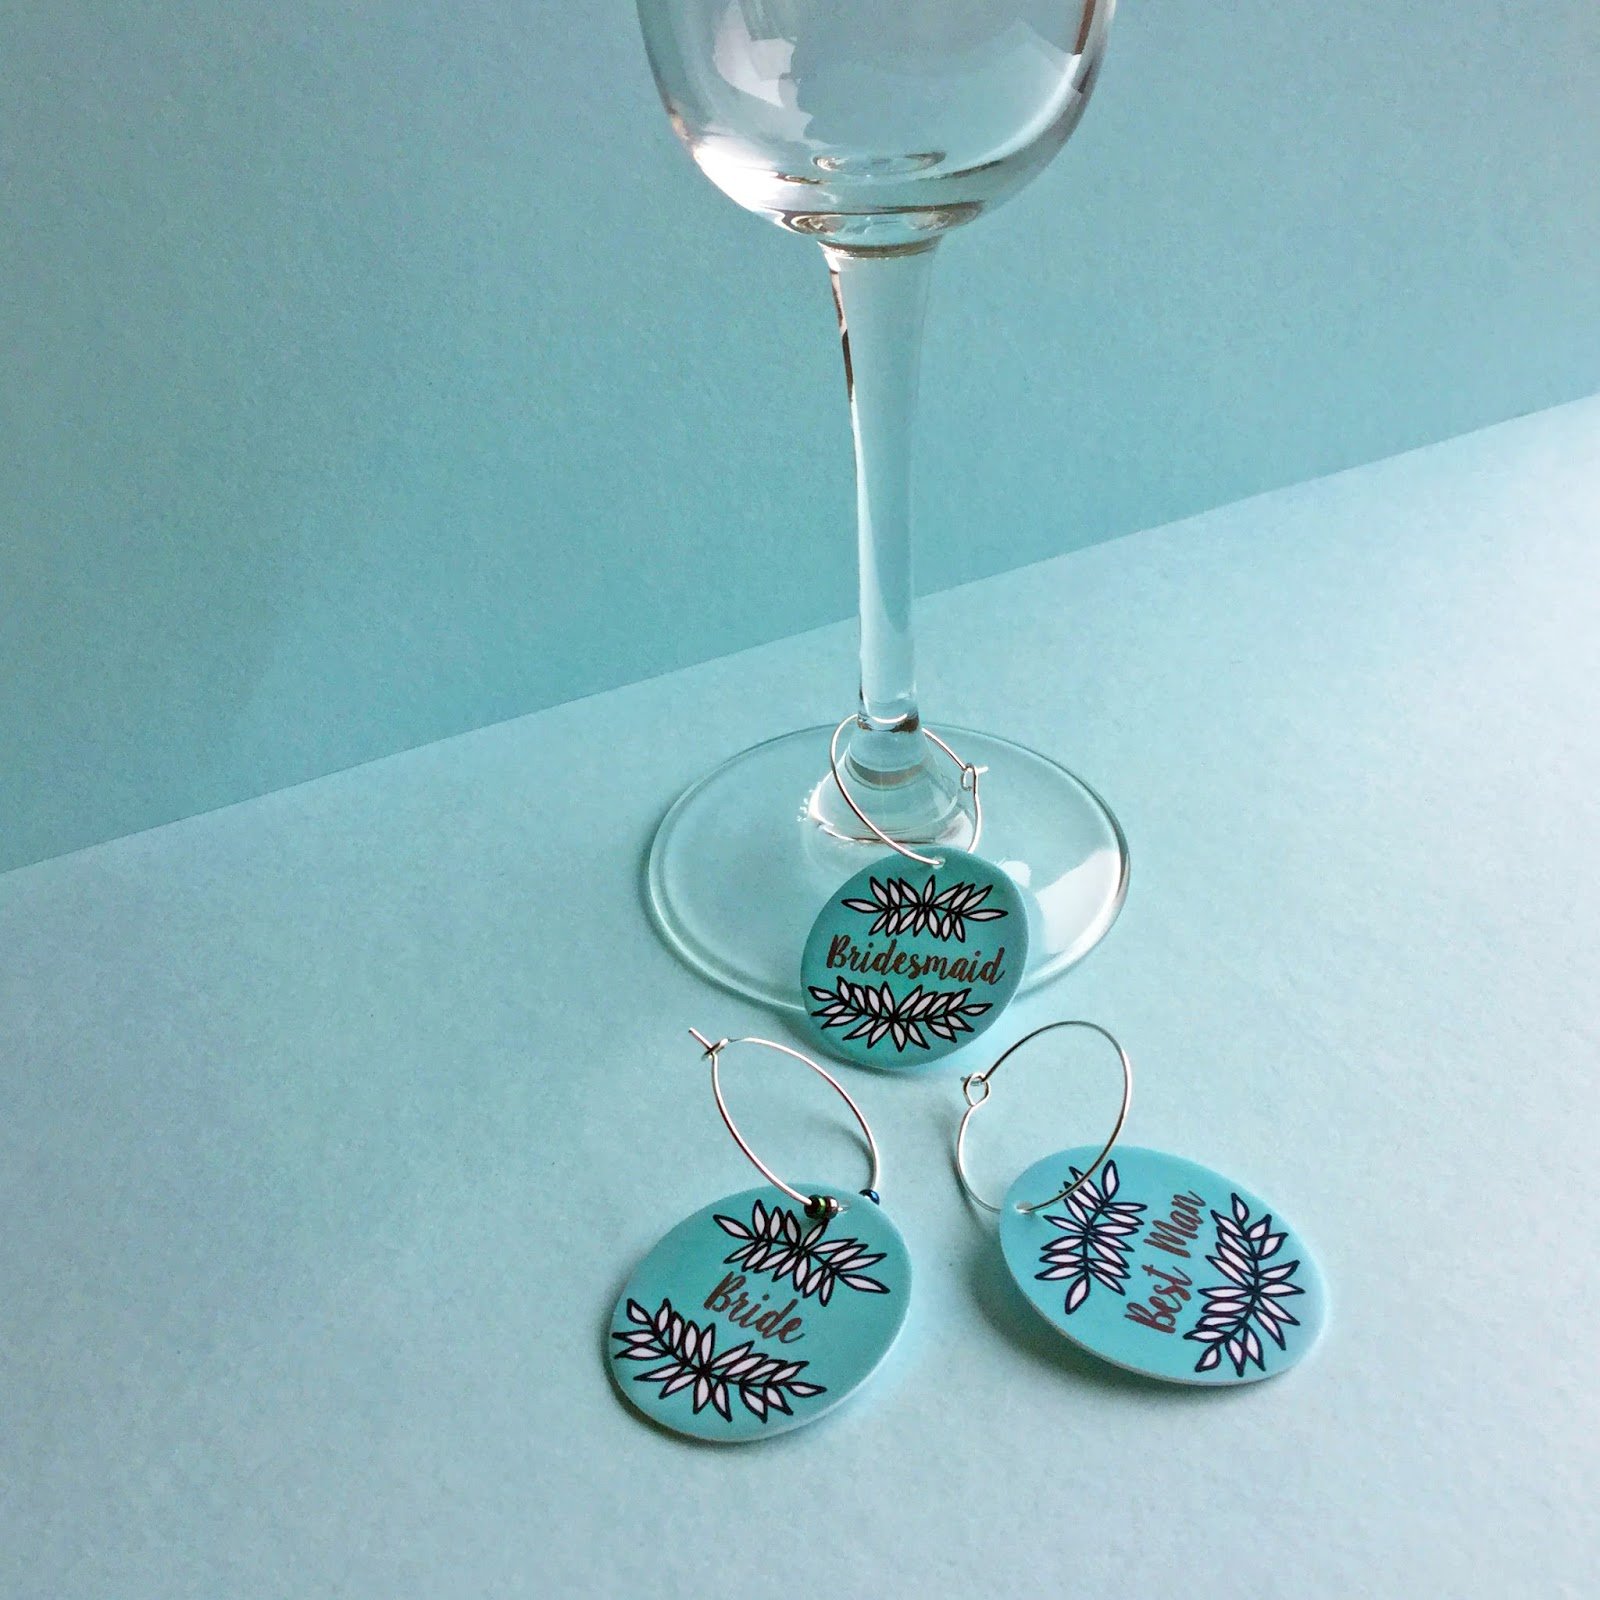 Crafting Quine: Make Wine Glass Charms with Silhouette Shrink Plastic